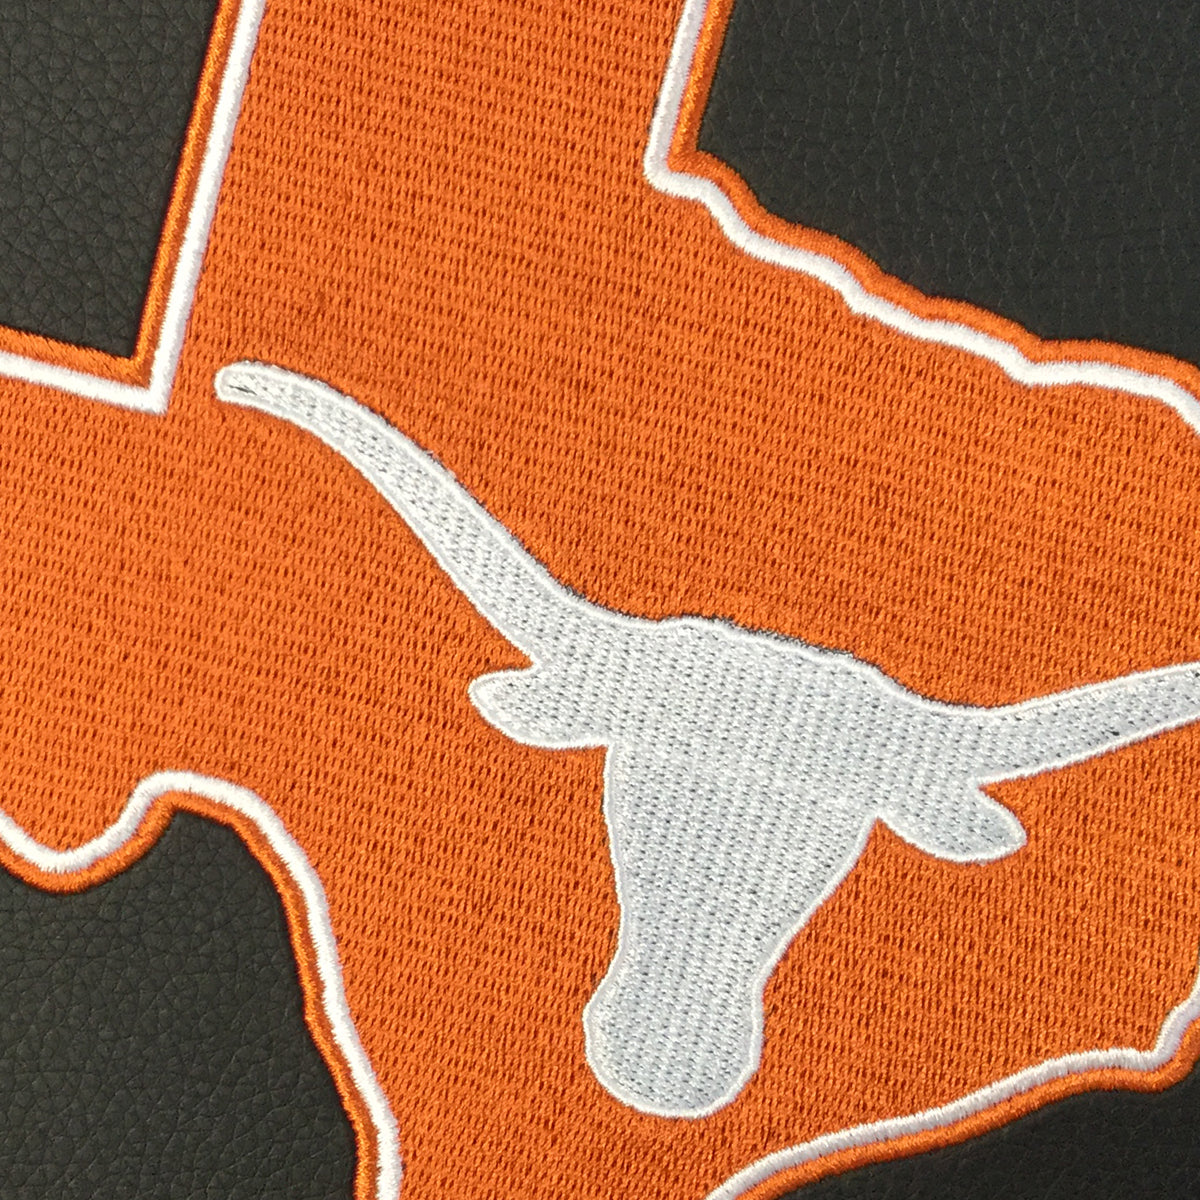 PhantomX Gaming Chair with Texas Longhorns Secondary